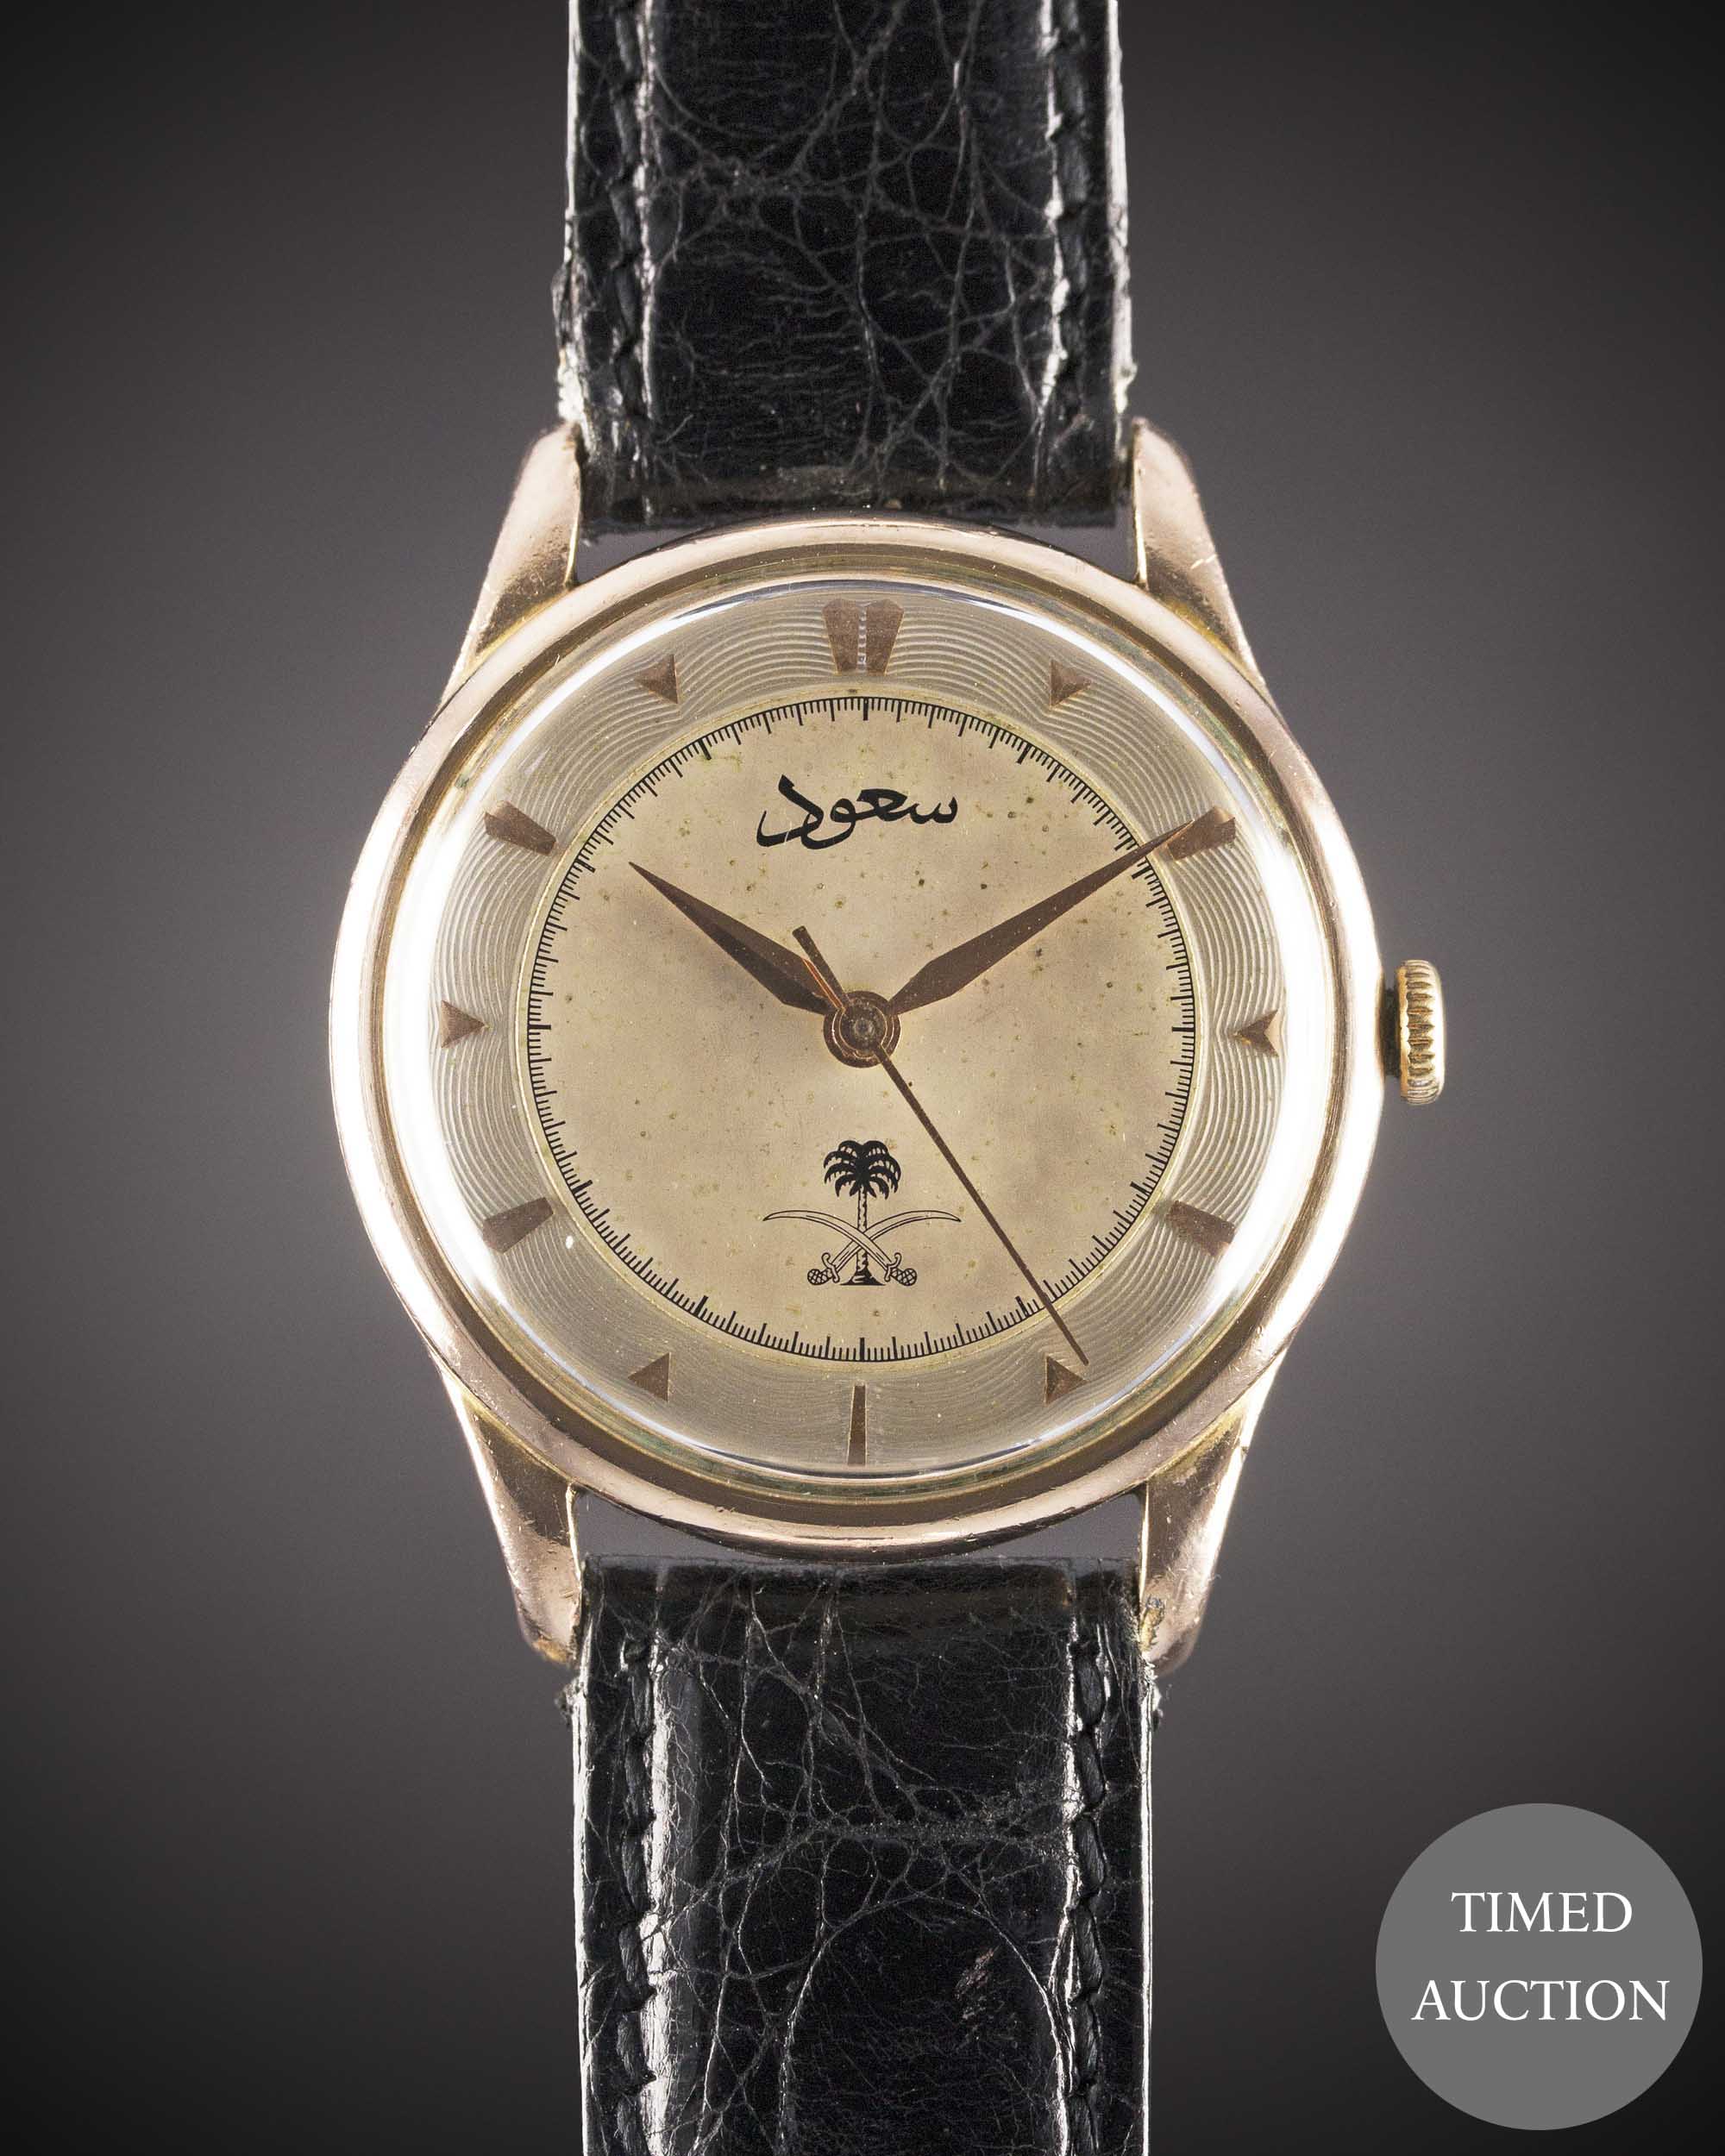 A GENTLEMAN'S PINK GOLD PLATED LONGINES WRIST WATCH CIRCA 1955, REF. 6393-5 TWO TONE SILVER DIAL